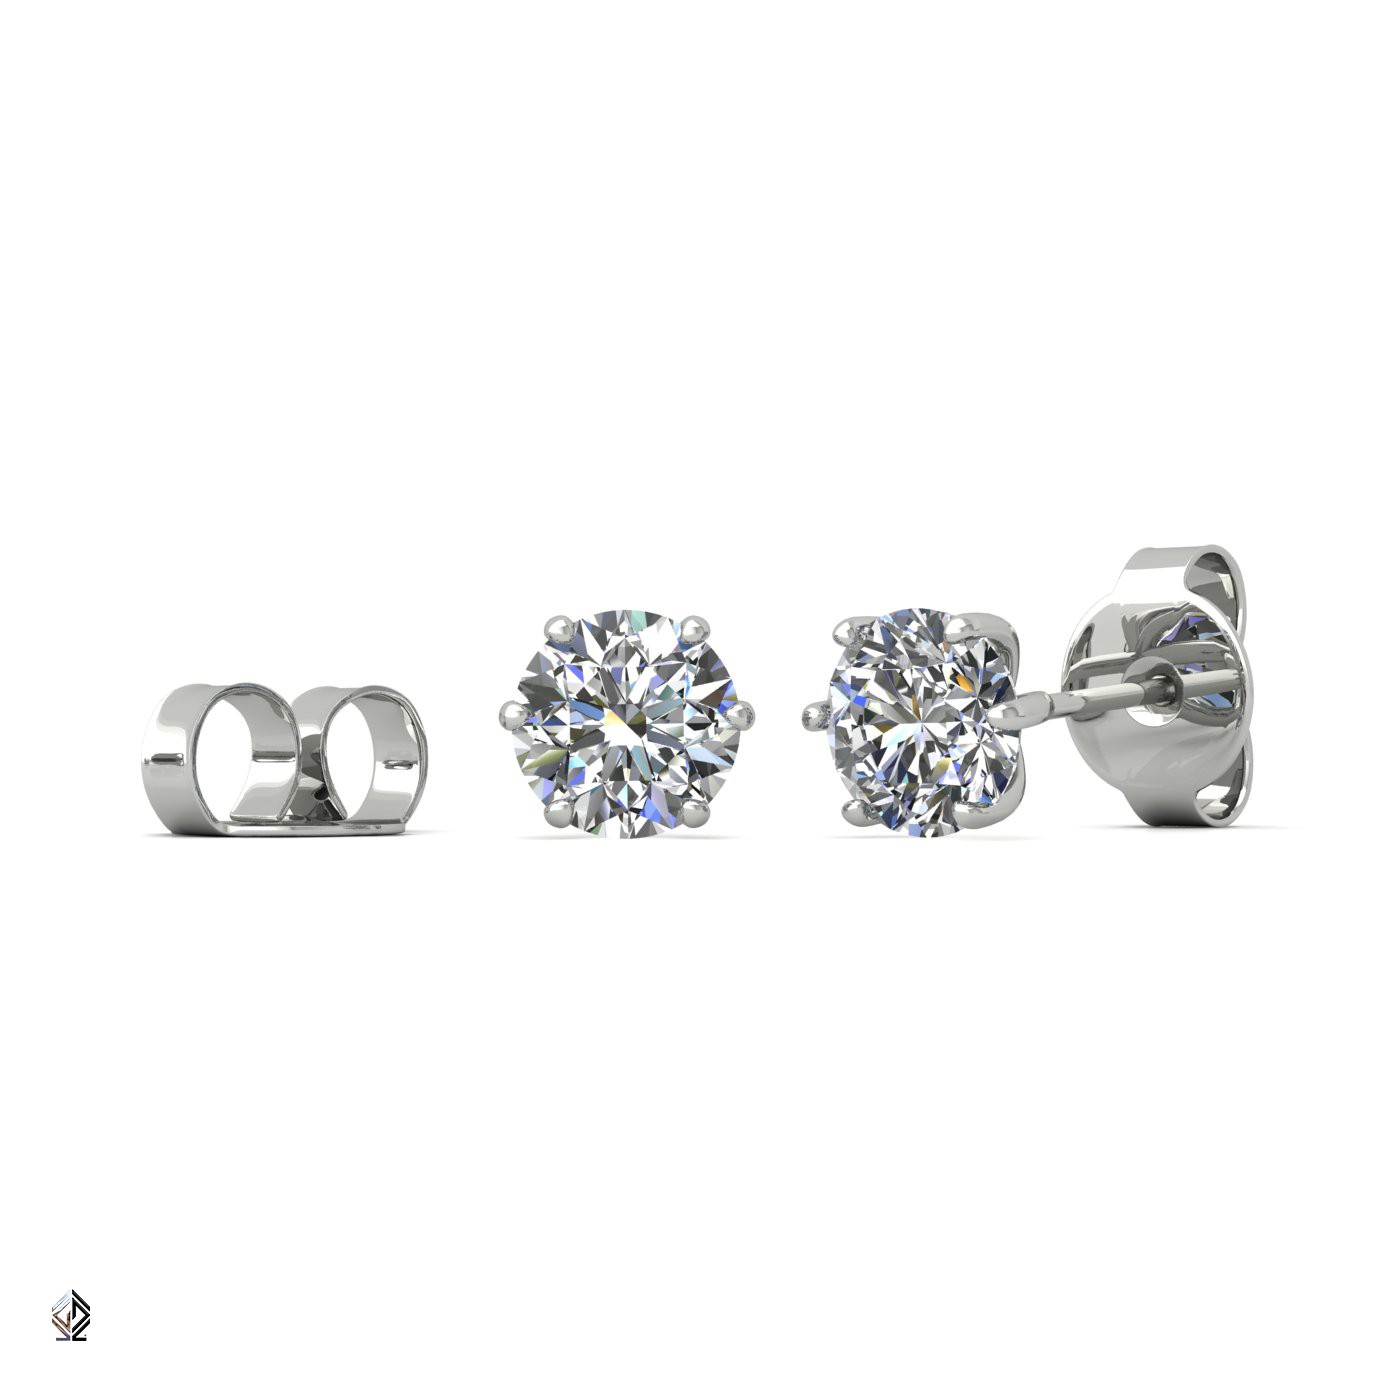 18k white gold 0,5 ct each (1,0 tcw) 6 prongs round shape diamond earrings Photos & images